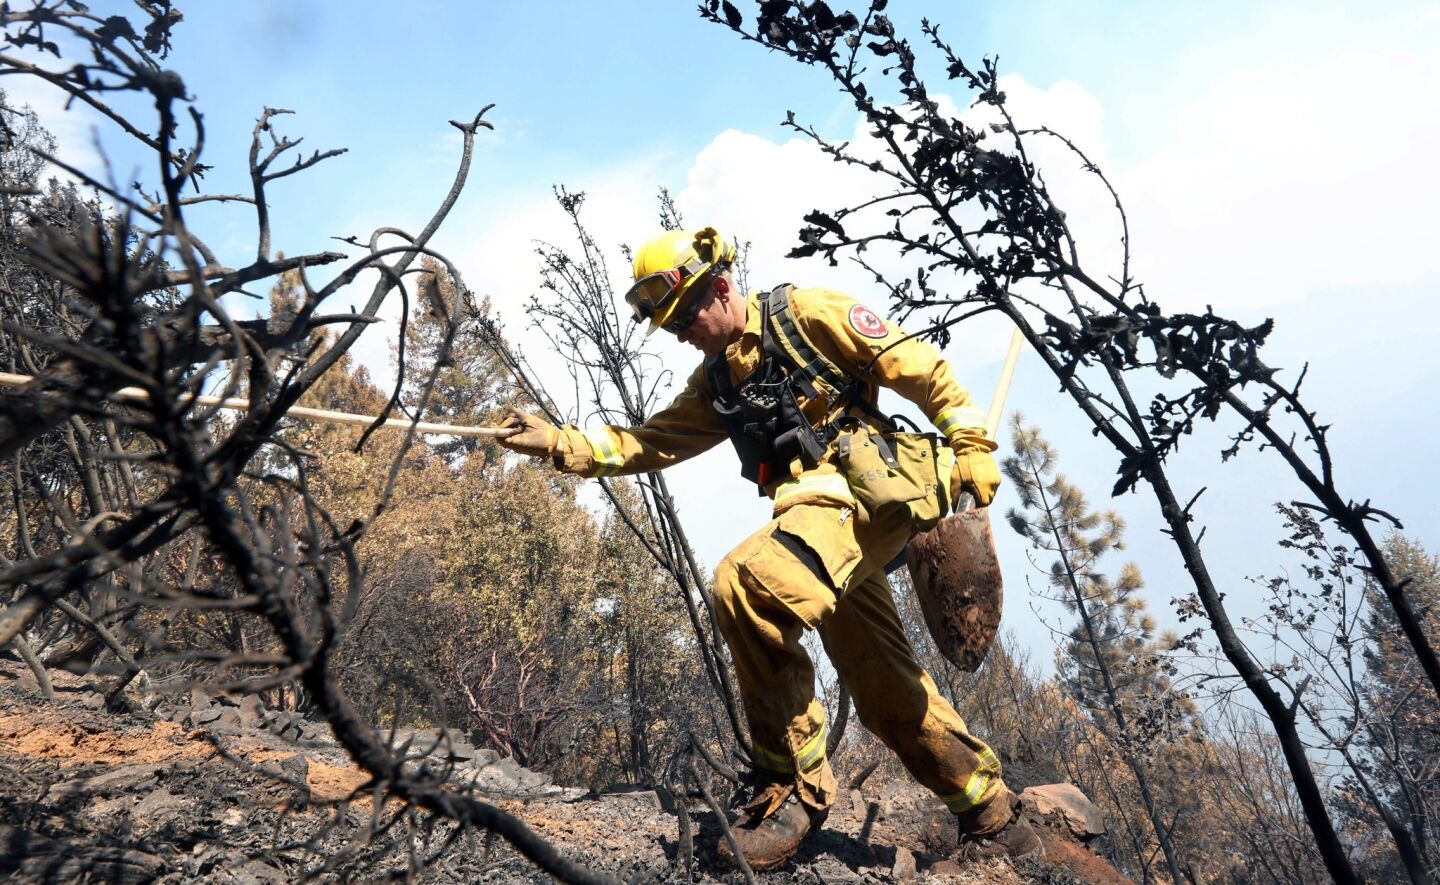 Firefighter Jesse Hadorowski climbs up steep terrain while battling the King fire near Pollock Pines, Calif.. on Sept. 15.